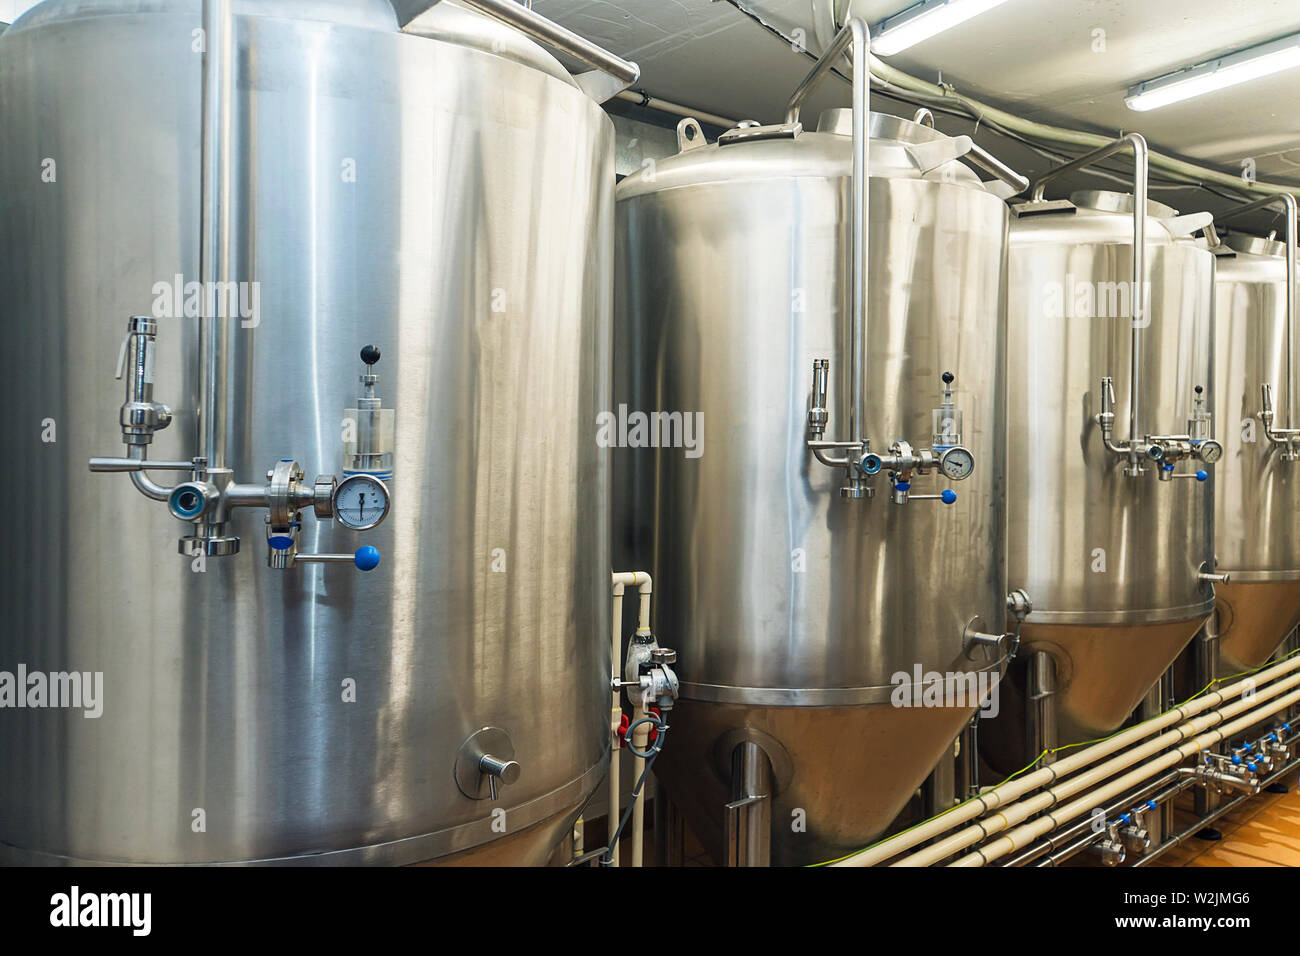 Lines of metal tanks in modern brewery. Shopfloor with brewery facilities. Manufacturable process of brewage. Mode of beer production. Industry Stock Photo